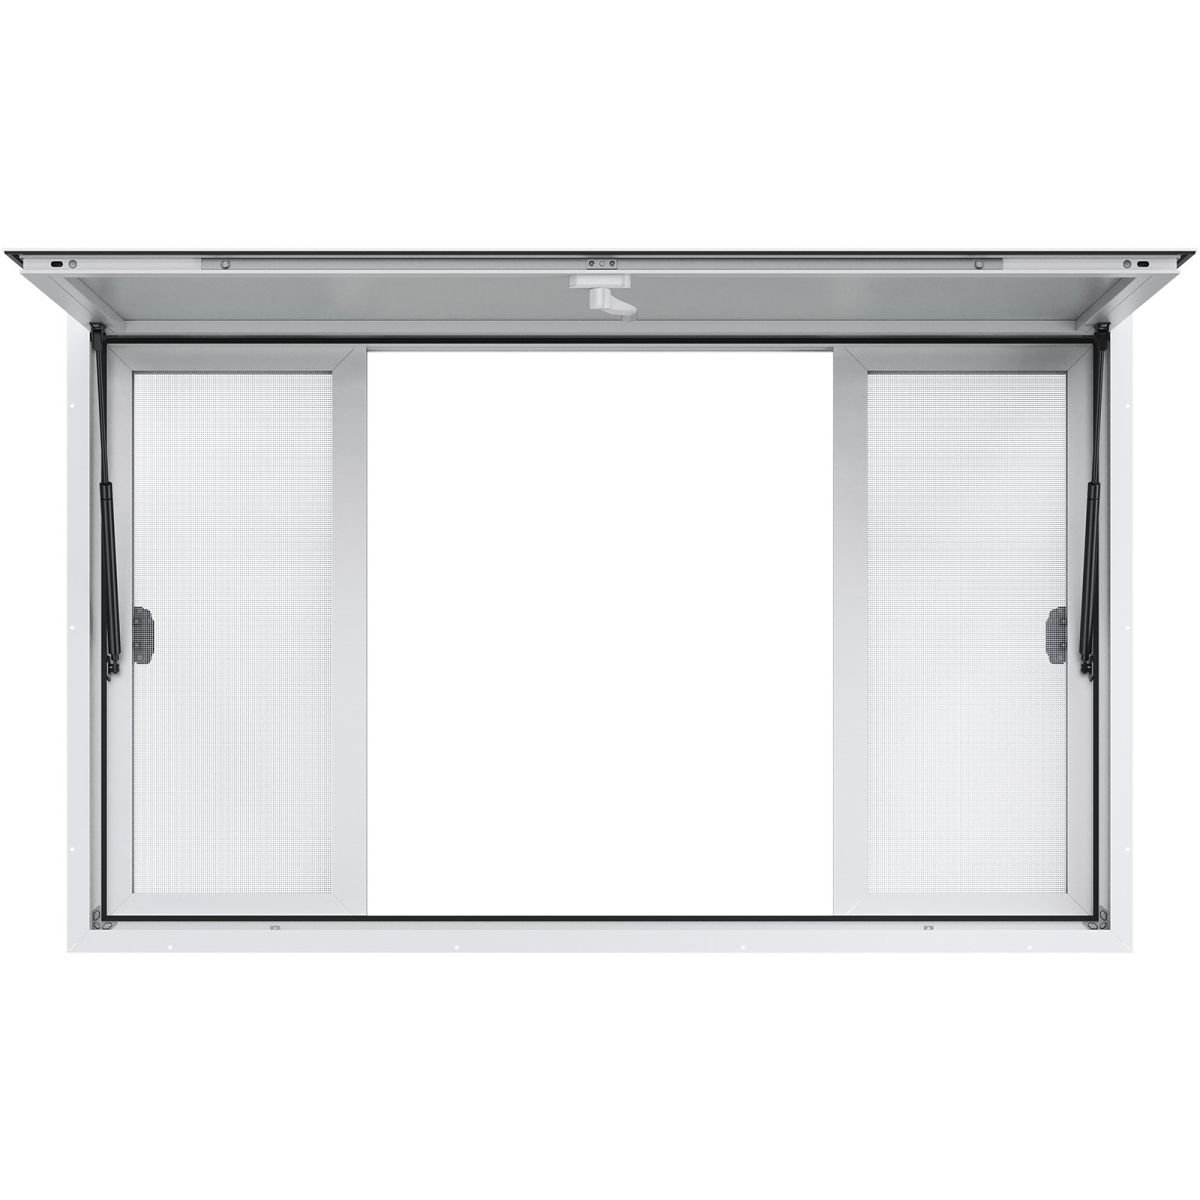 Picture of Vevor SCFWCK36X60IFT44HV0 60 x 36 in. Aluminum Alloy Food Truck Service Window